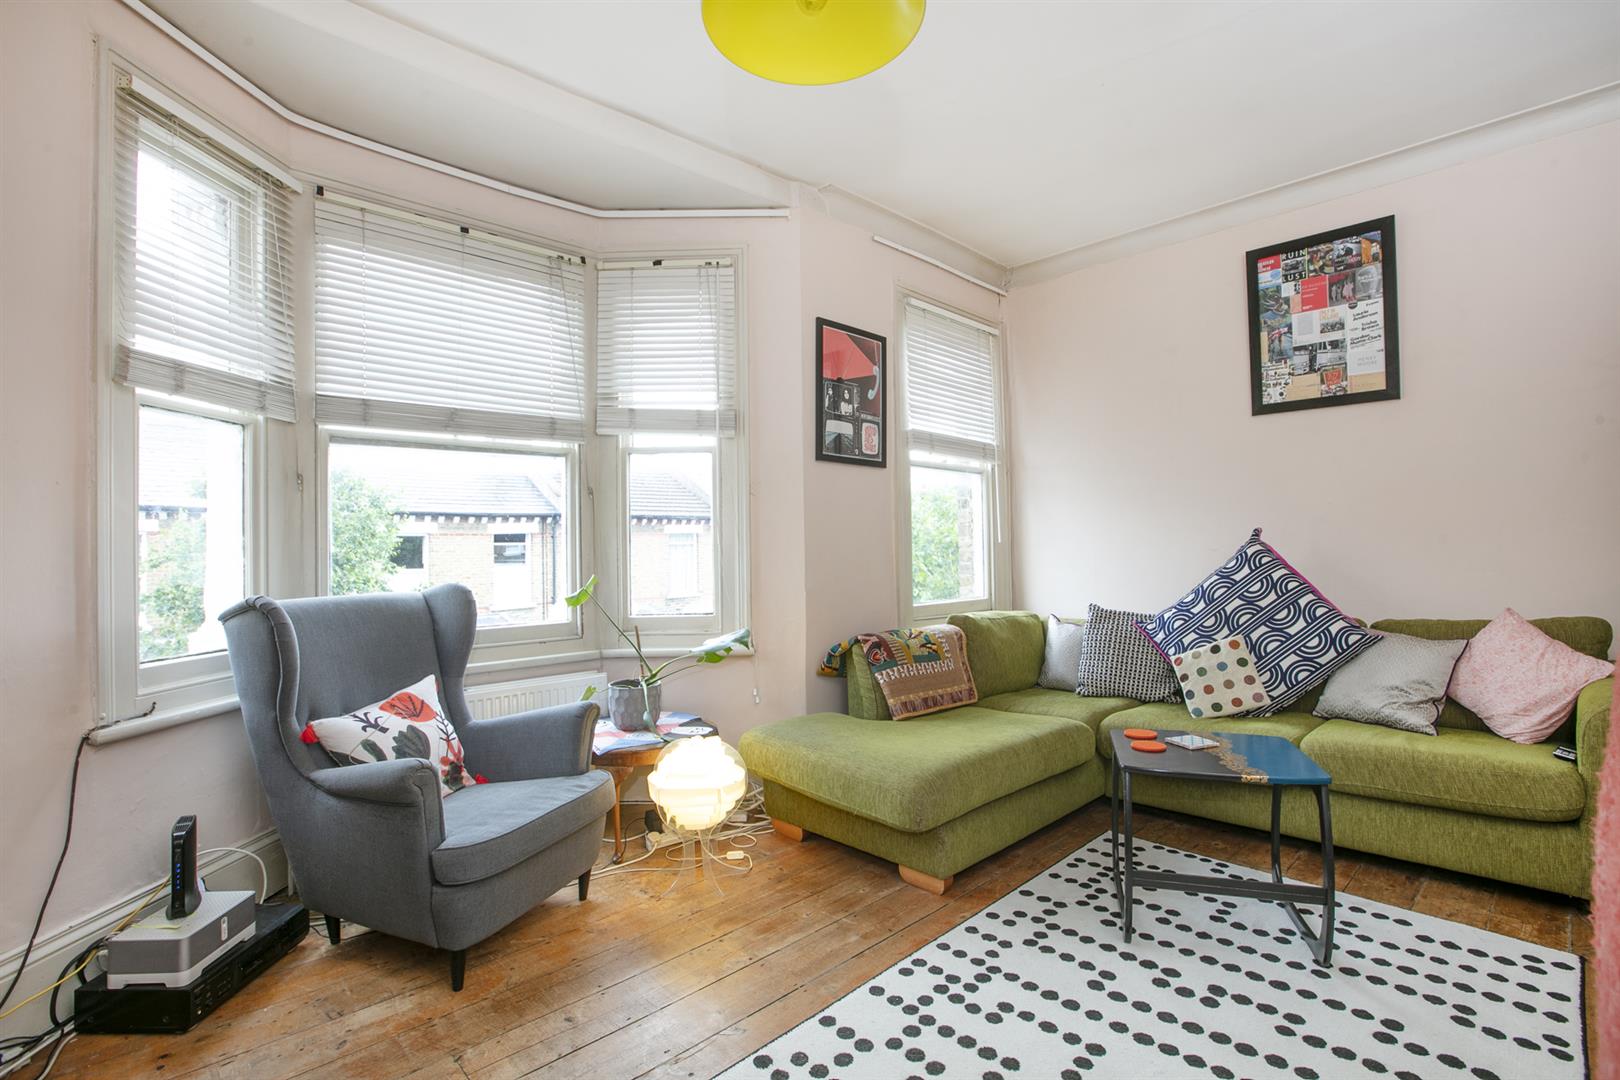 Flat - Conversion For Sale in Gairloch Road, Camberwell, SE5 956 view6